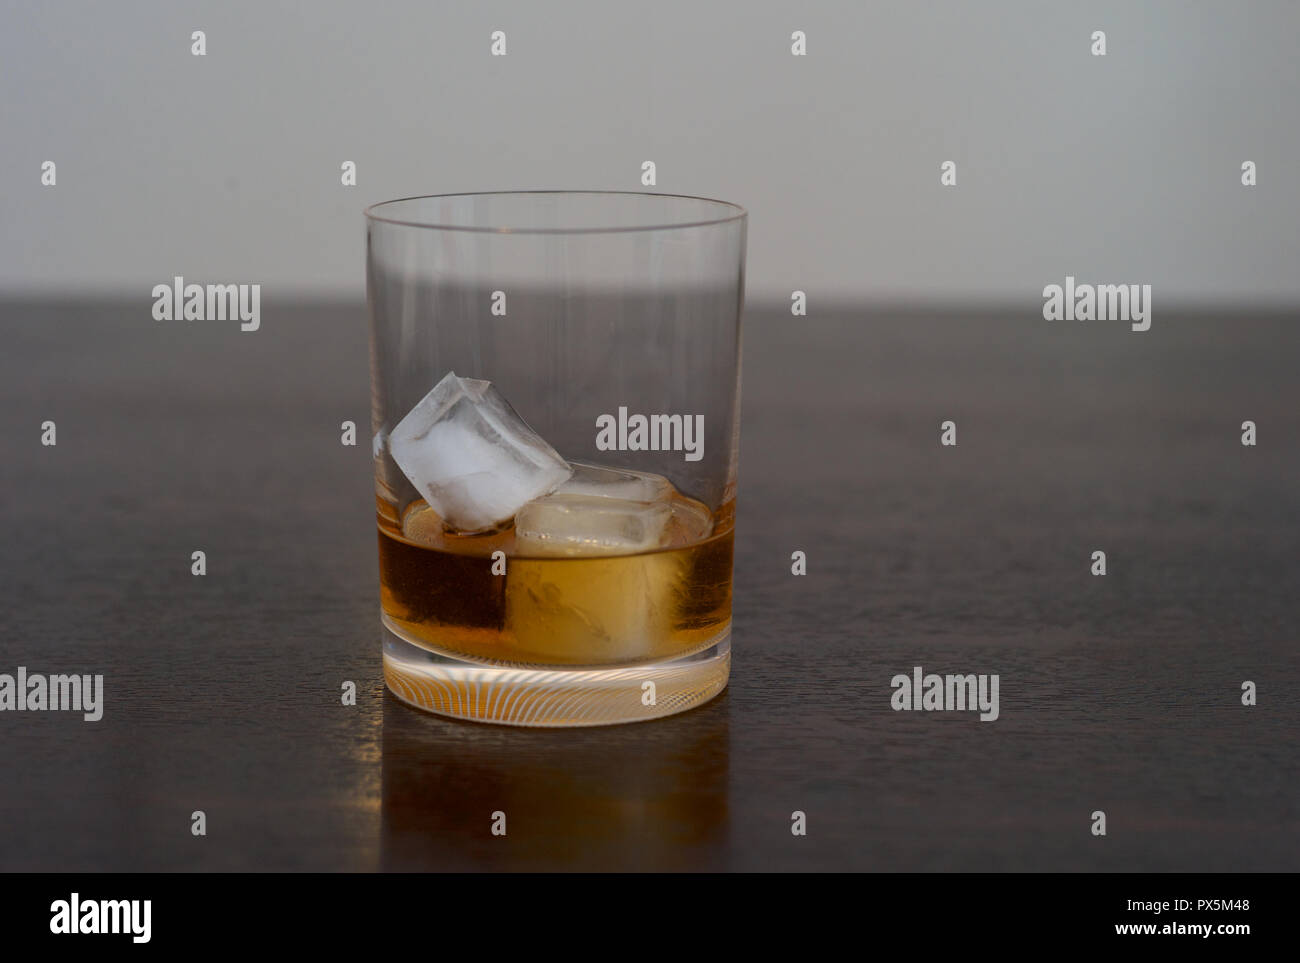 Whiskey, Bourbon, Scotch or Rum on the Rocks in an Elegant Tumbler on a Dark Wooden Table Stock Photo